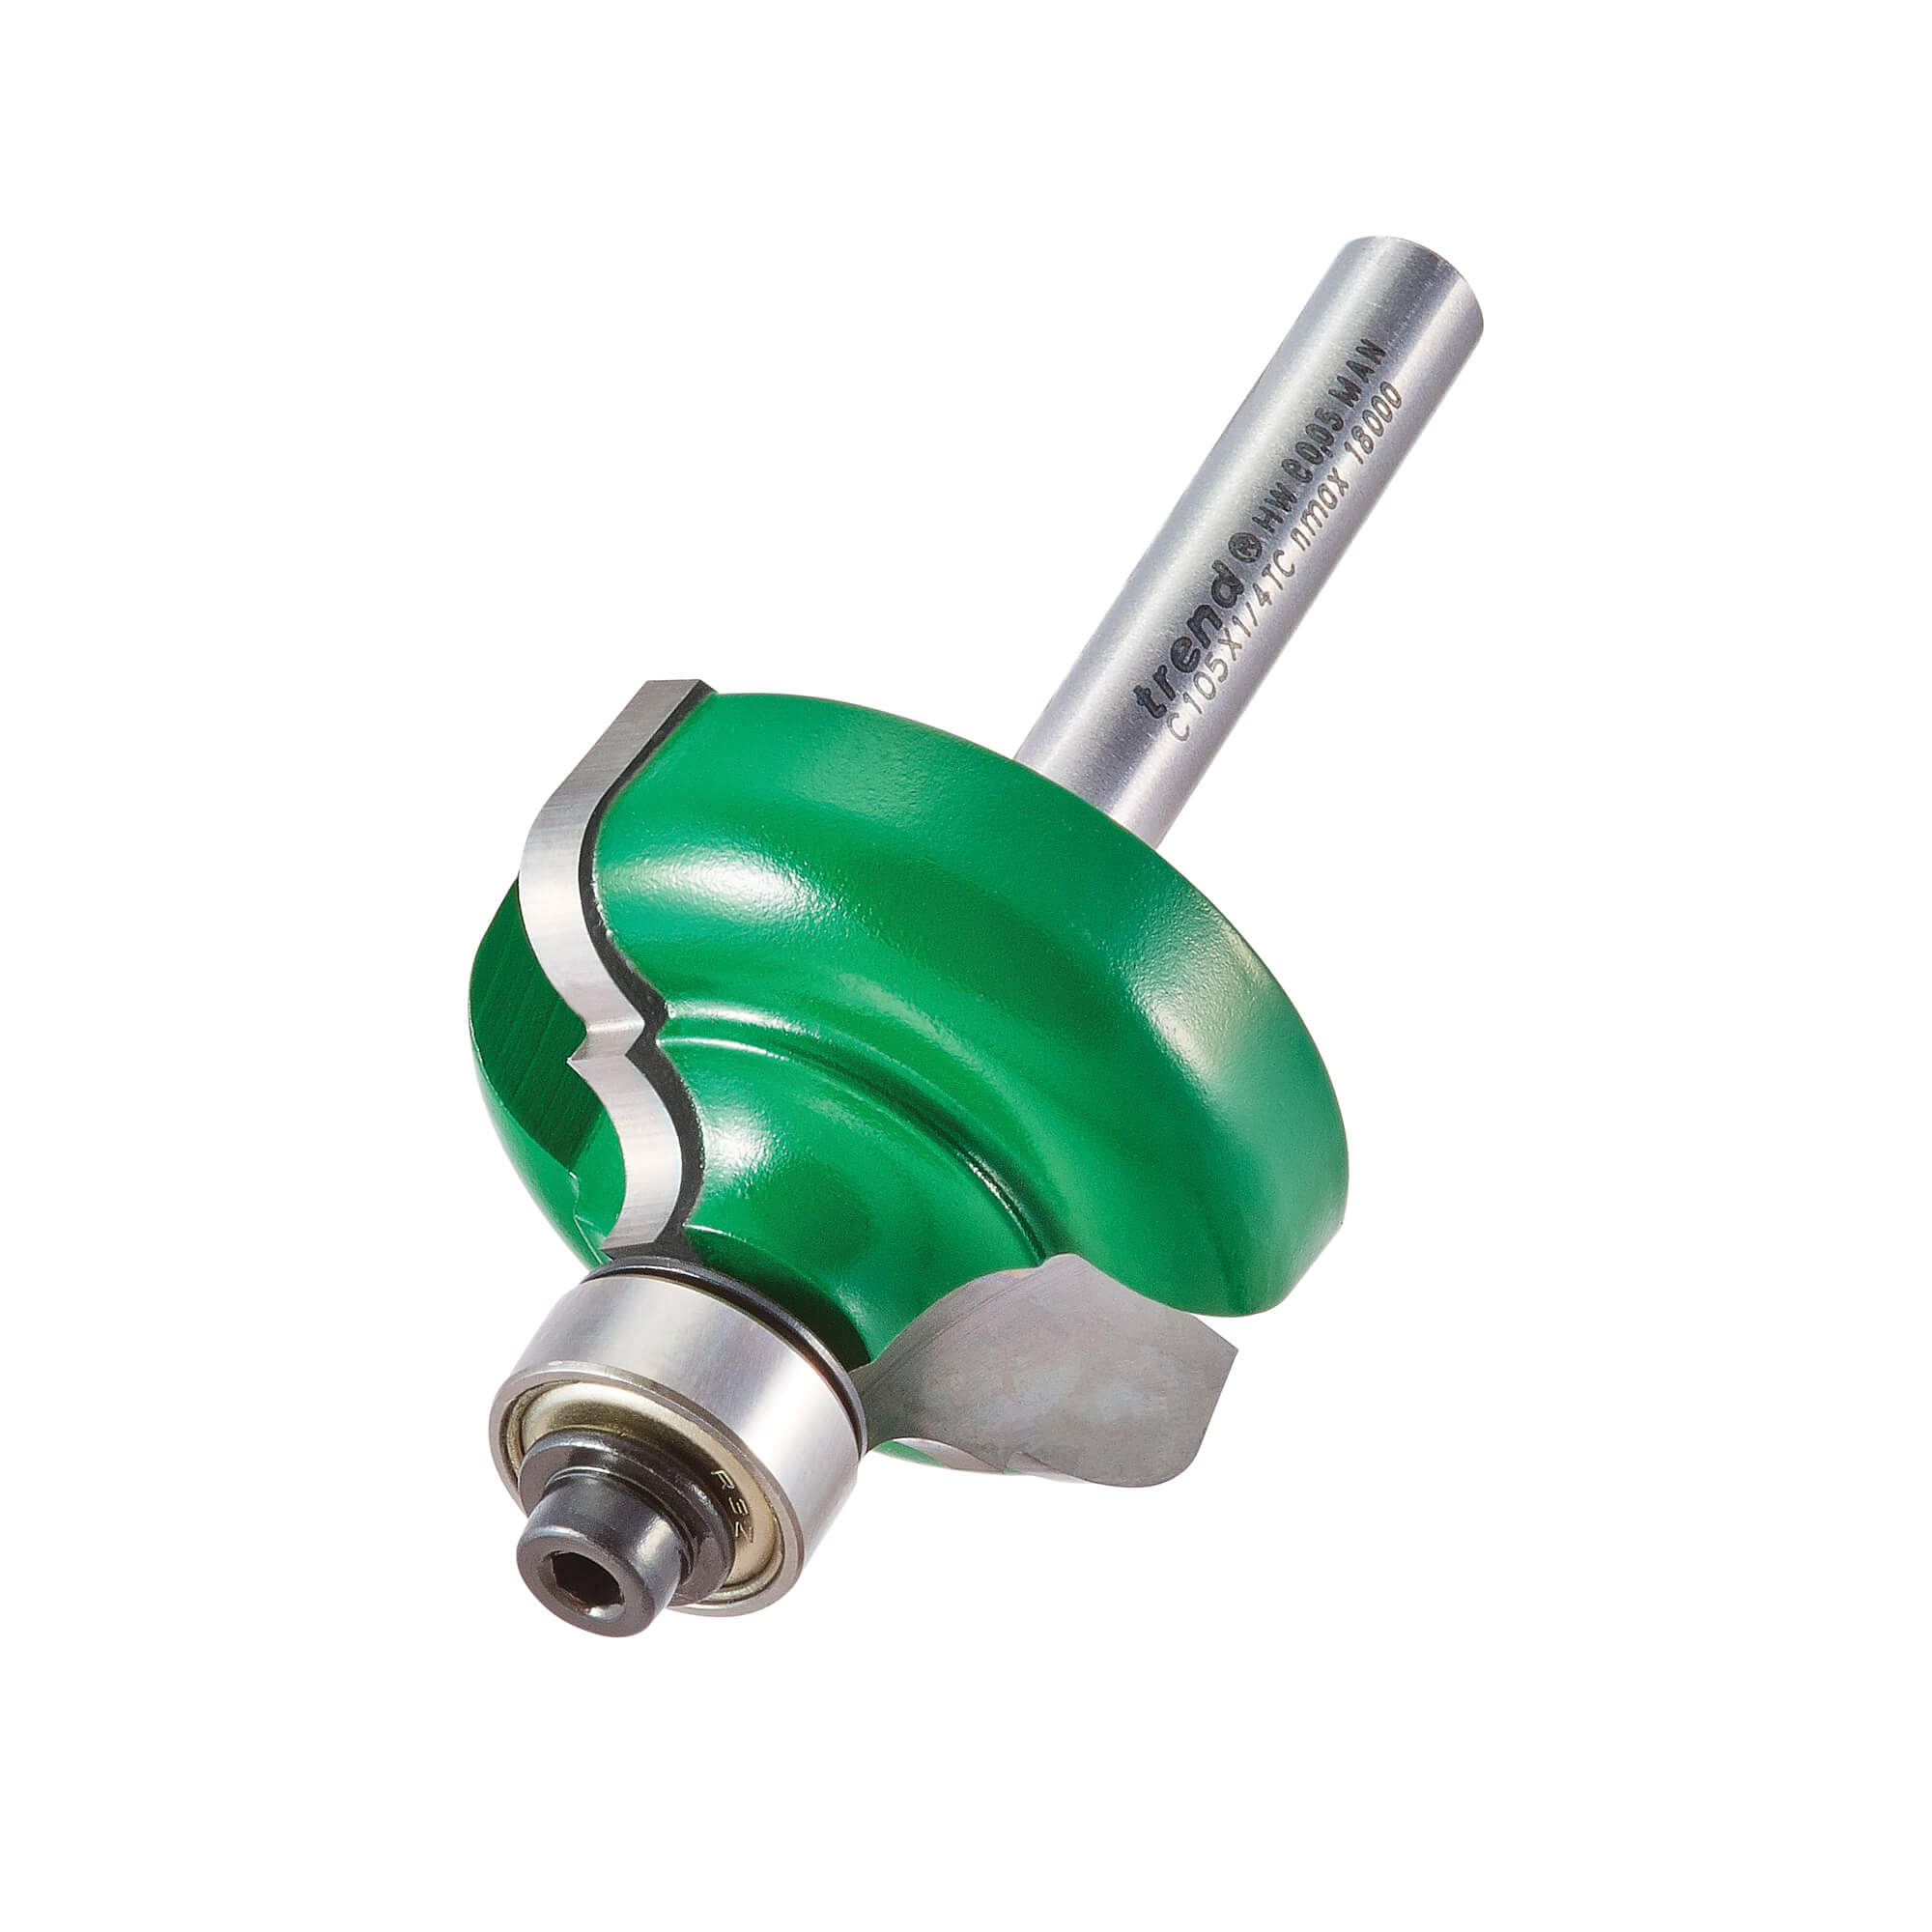 Image of Trend CRAFTPRO Bearing Guided Broken Ogee Quirk Router Cutter 6.3mm 17.5mm 1/4"